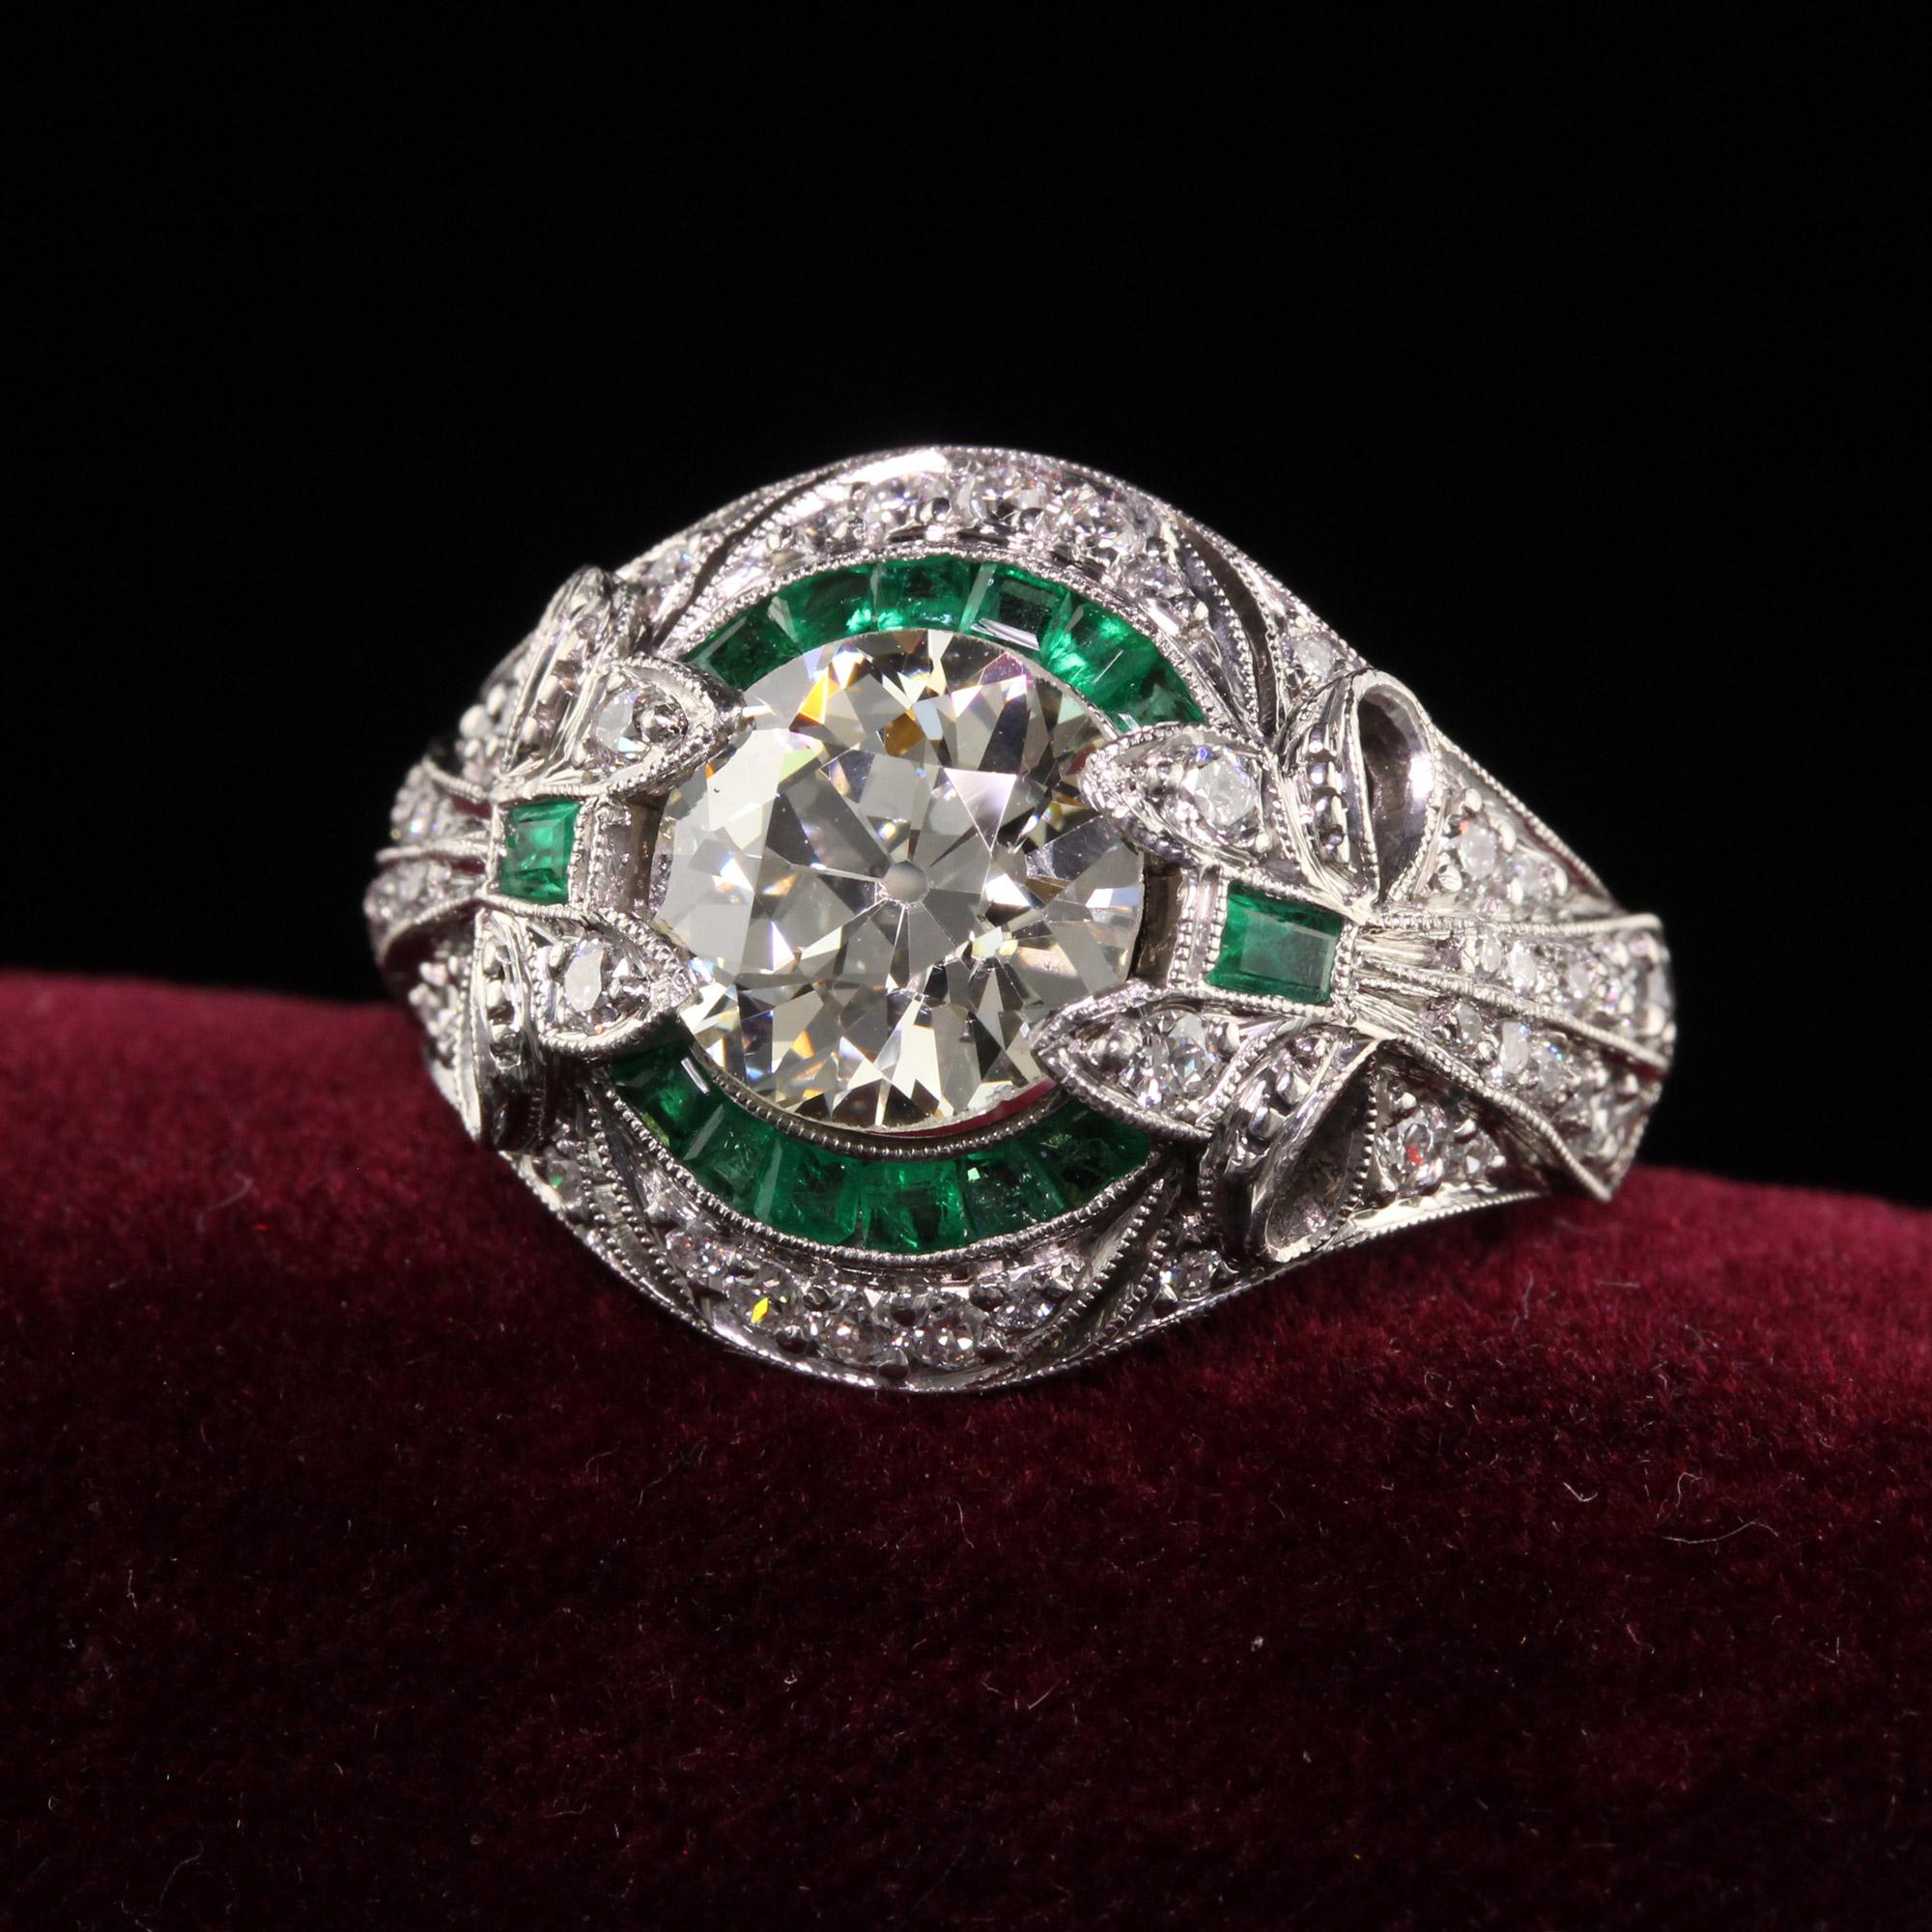 Beautiful Antique Art Deco Platinum Old European Diamond Emerald Engagement Ring - GIA. This incredible engagement ring is crafted in platinum. The center holds a beautiful old european cut diamond that is GIA certified. It is set in an art deco